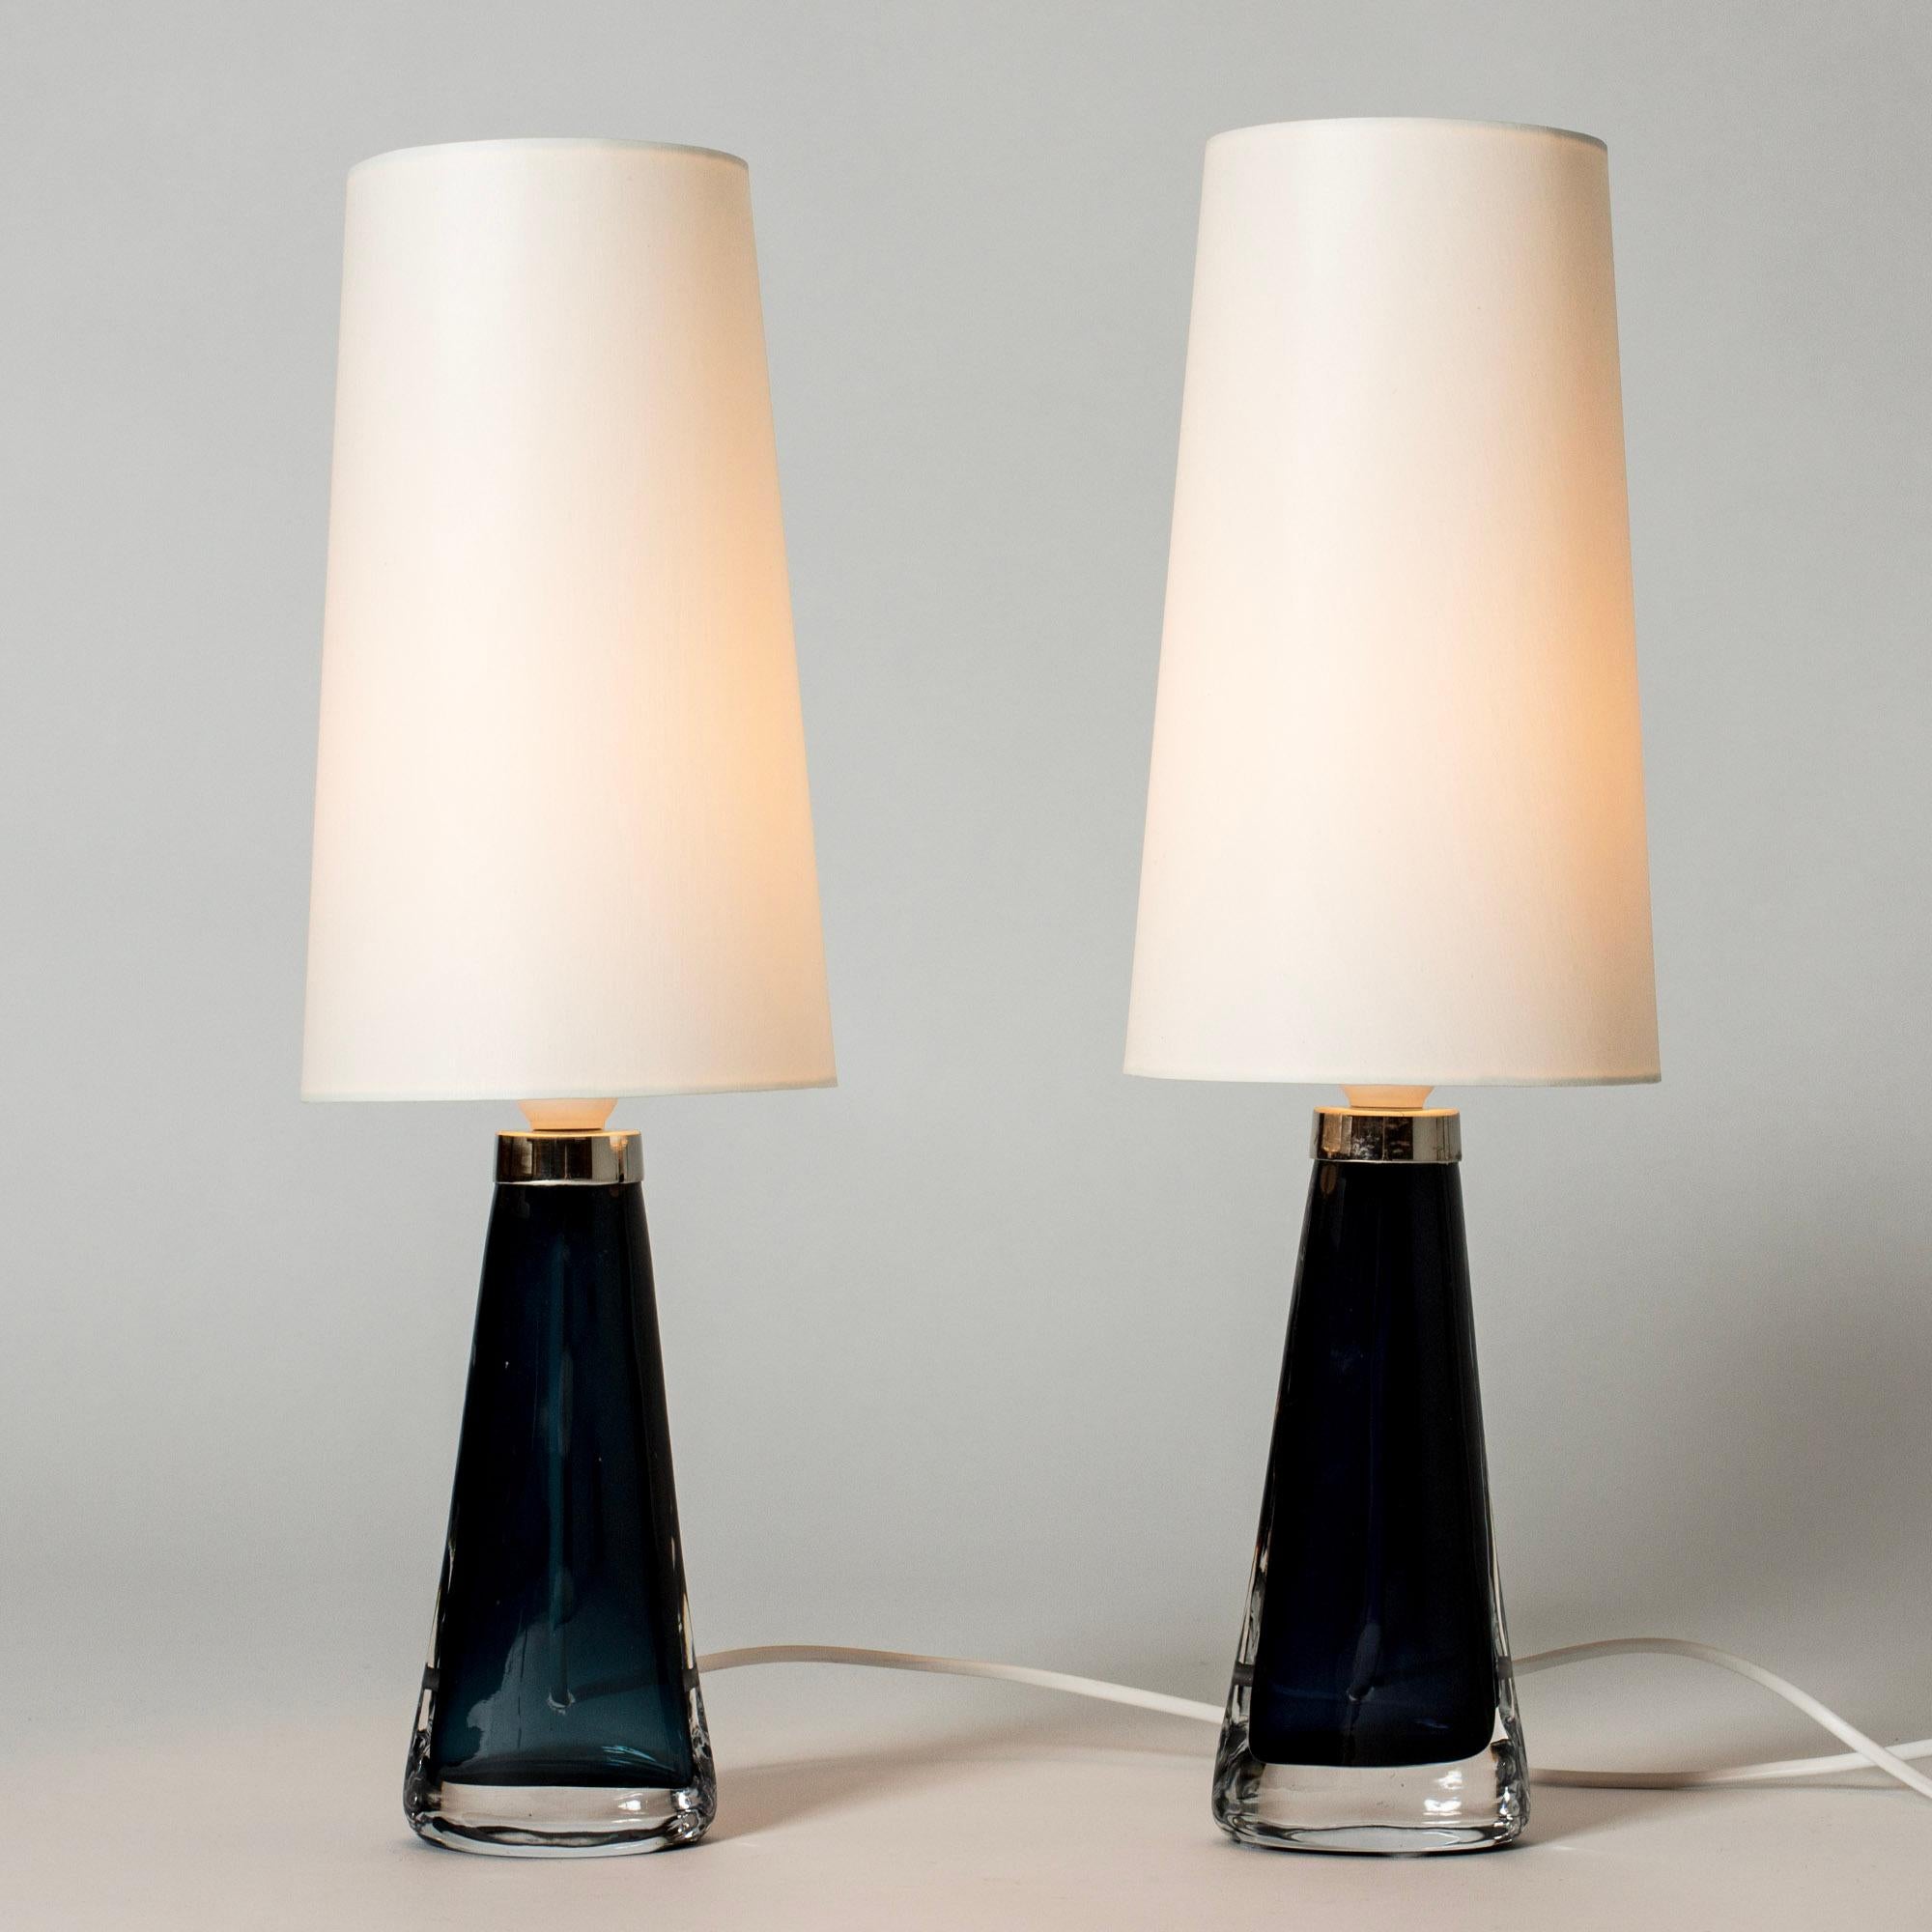 Pair of crystal glass table lamps by Carl Fagerlund in a neat size. Made in dark blue glass in a narrow conical shape, almond shaped at the base. Beautiful translucent color, elegant design.